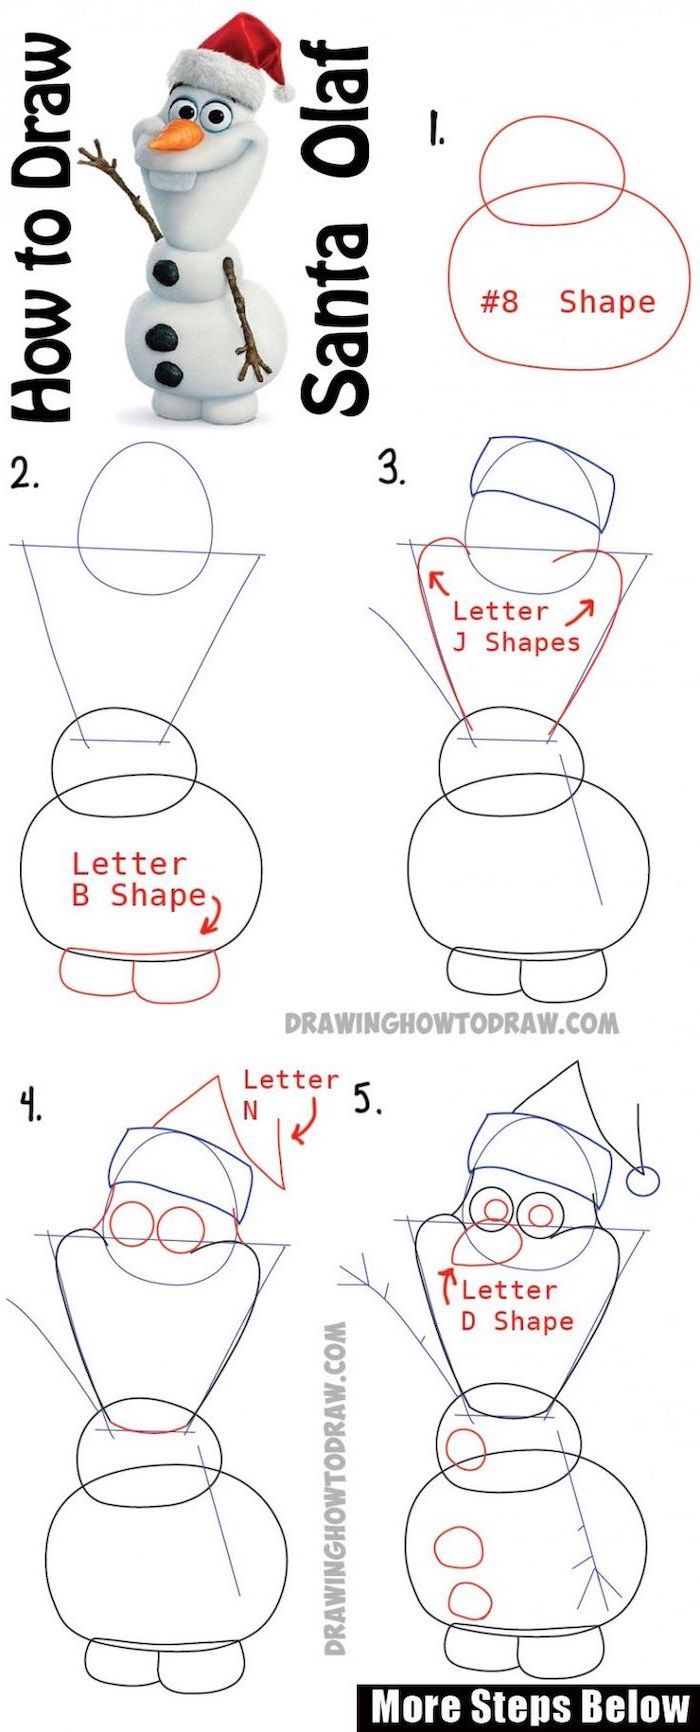 how to draw olaf, frozen inspired, step by step, diy tutorial, easy sketches to draw